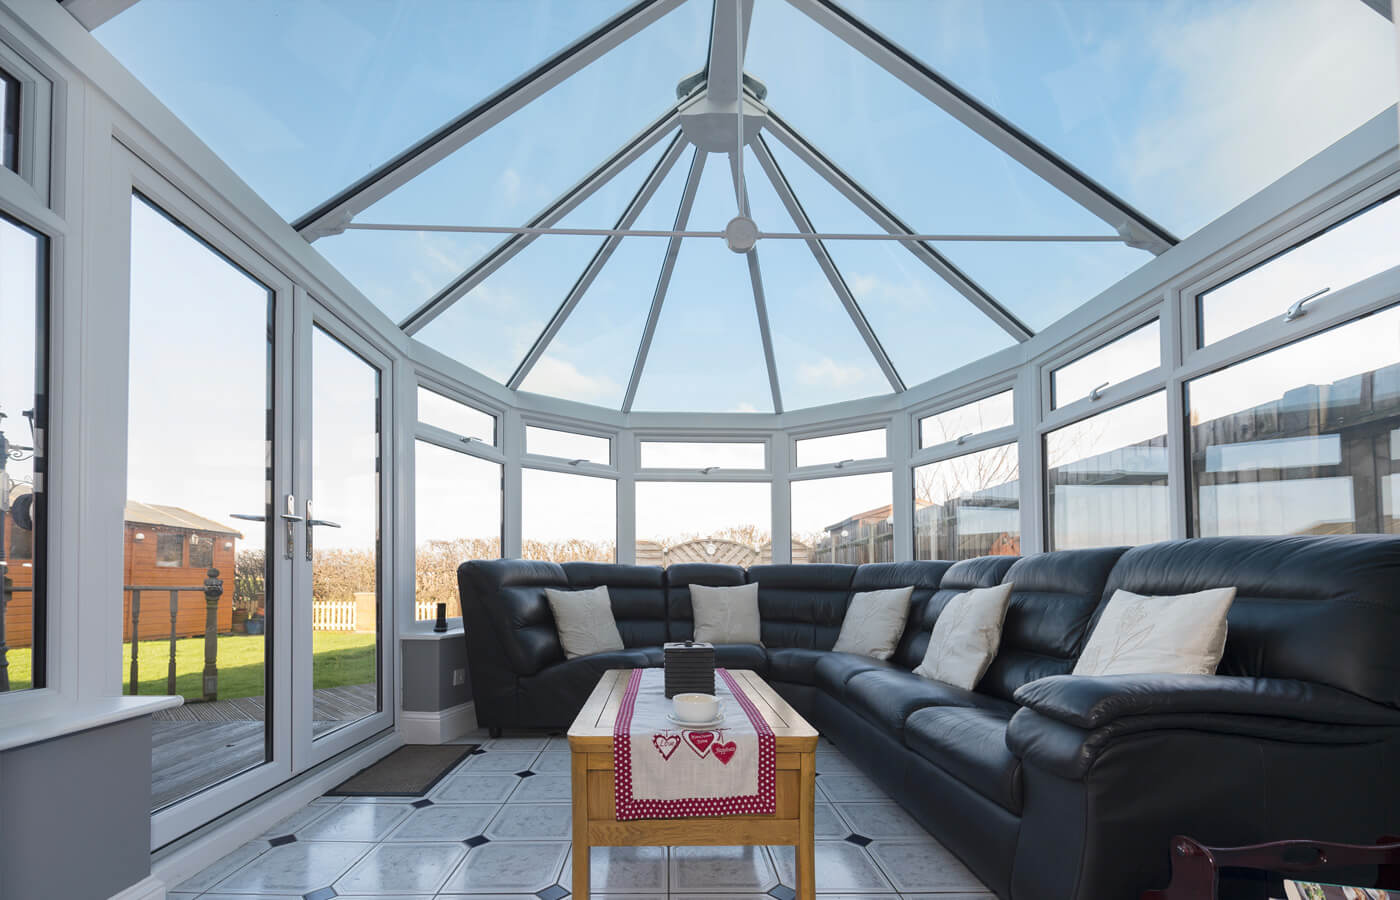 Conservatory Extensions Installations By Safe and sound windows